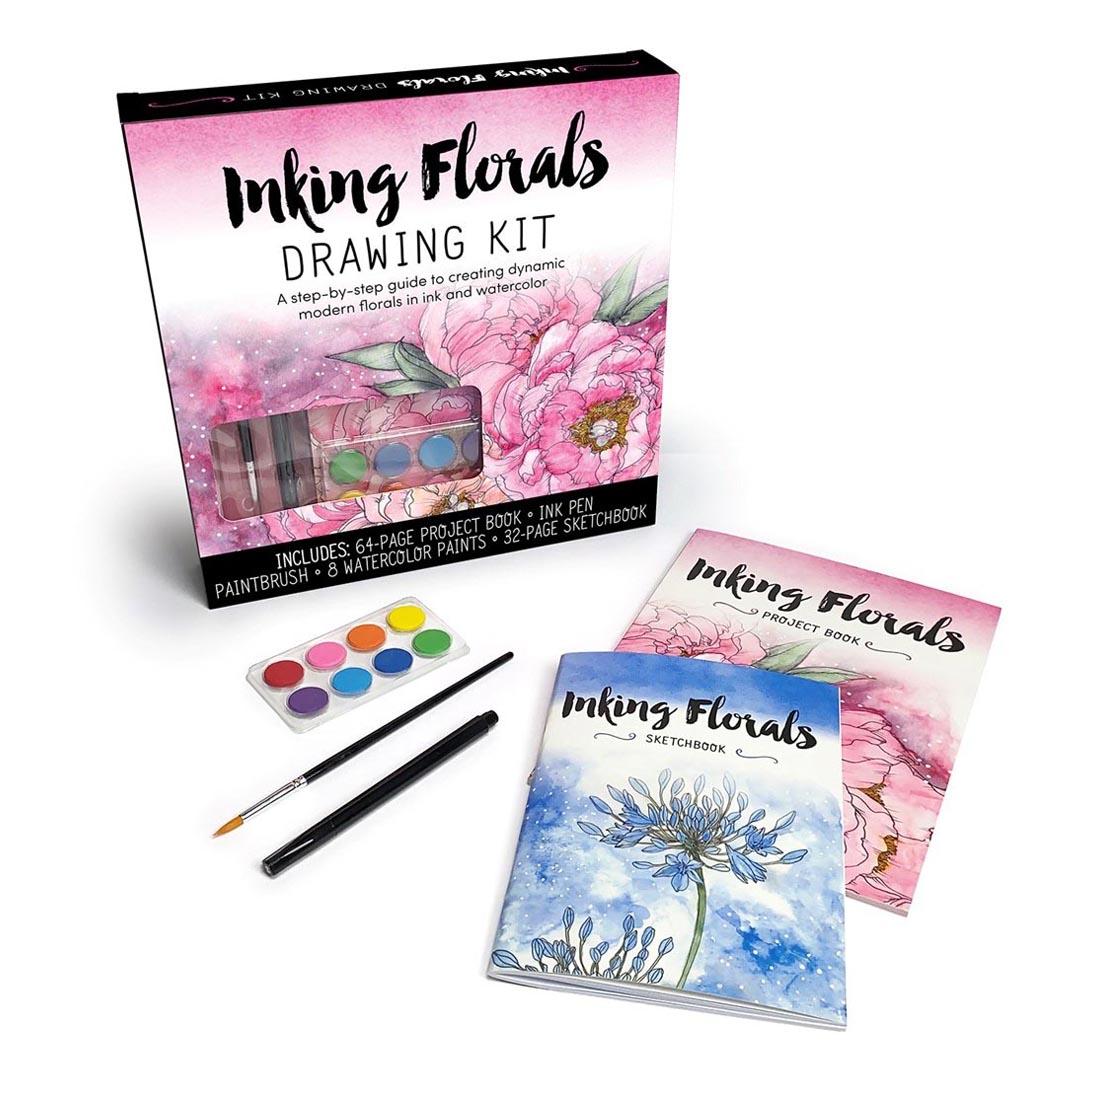 Inking Florals Drawing Kit package plus Project book, Sketchbook, paints, brush and pen